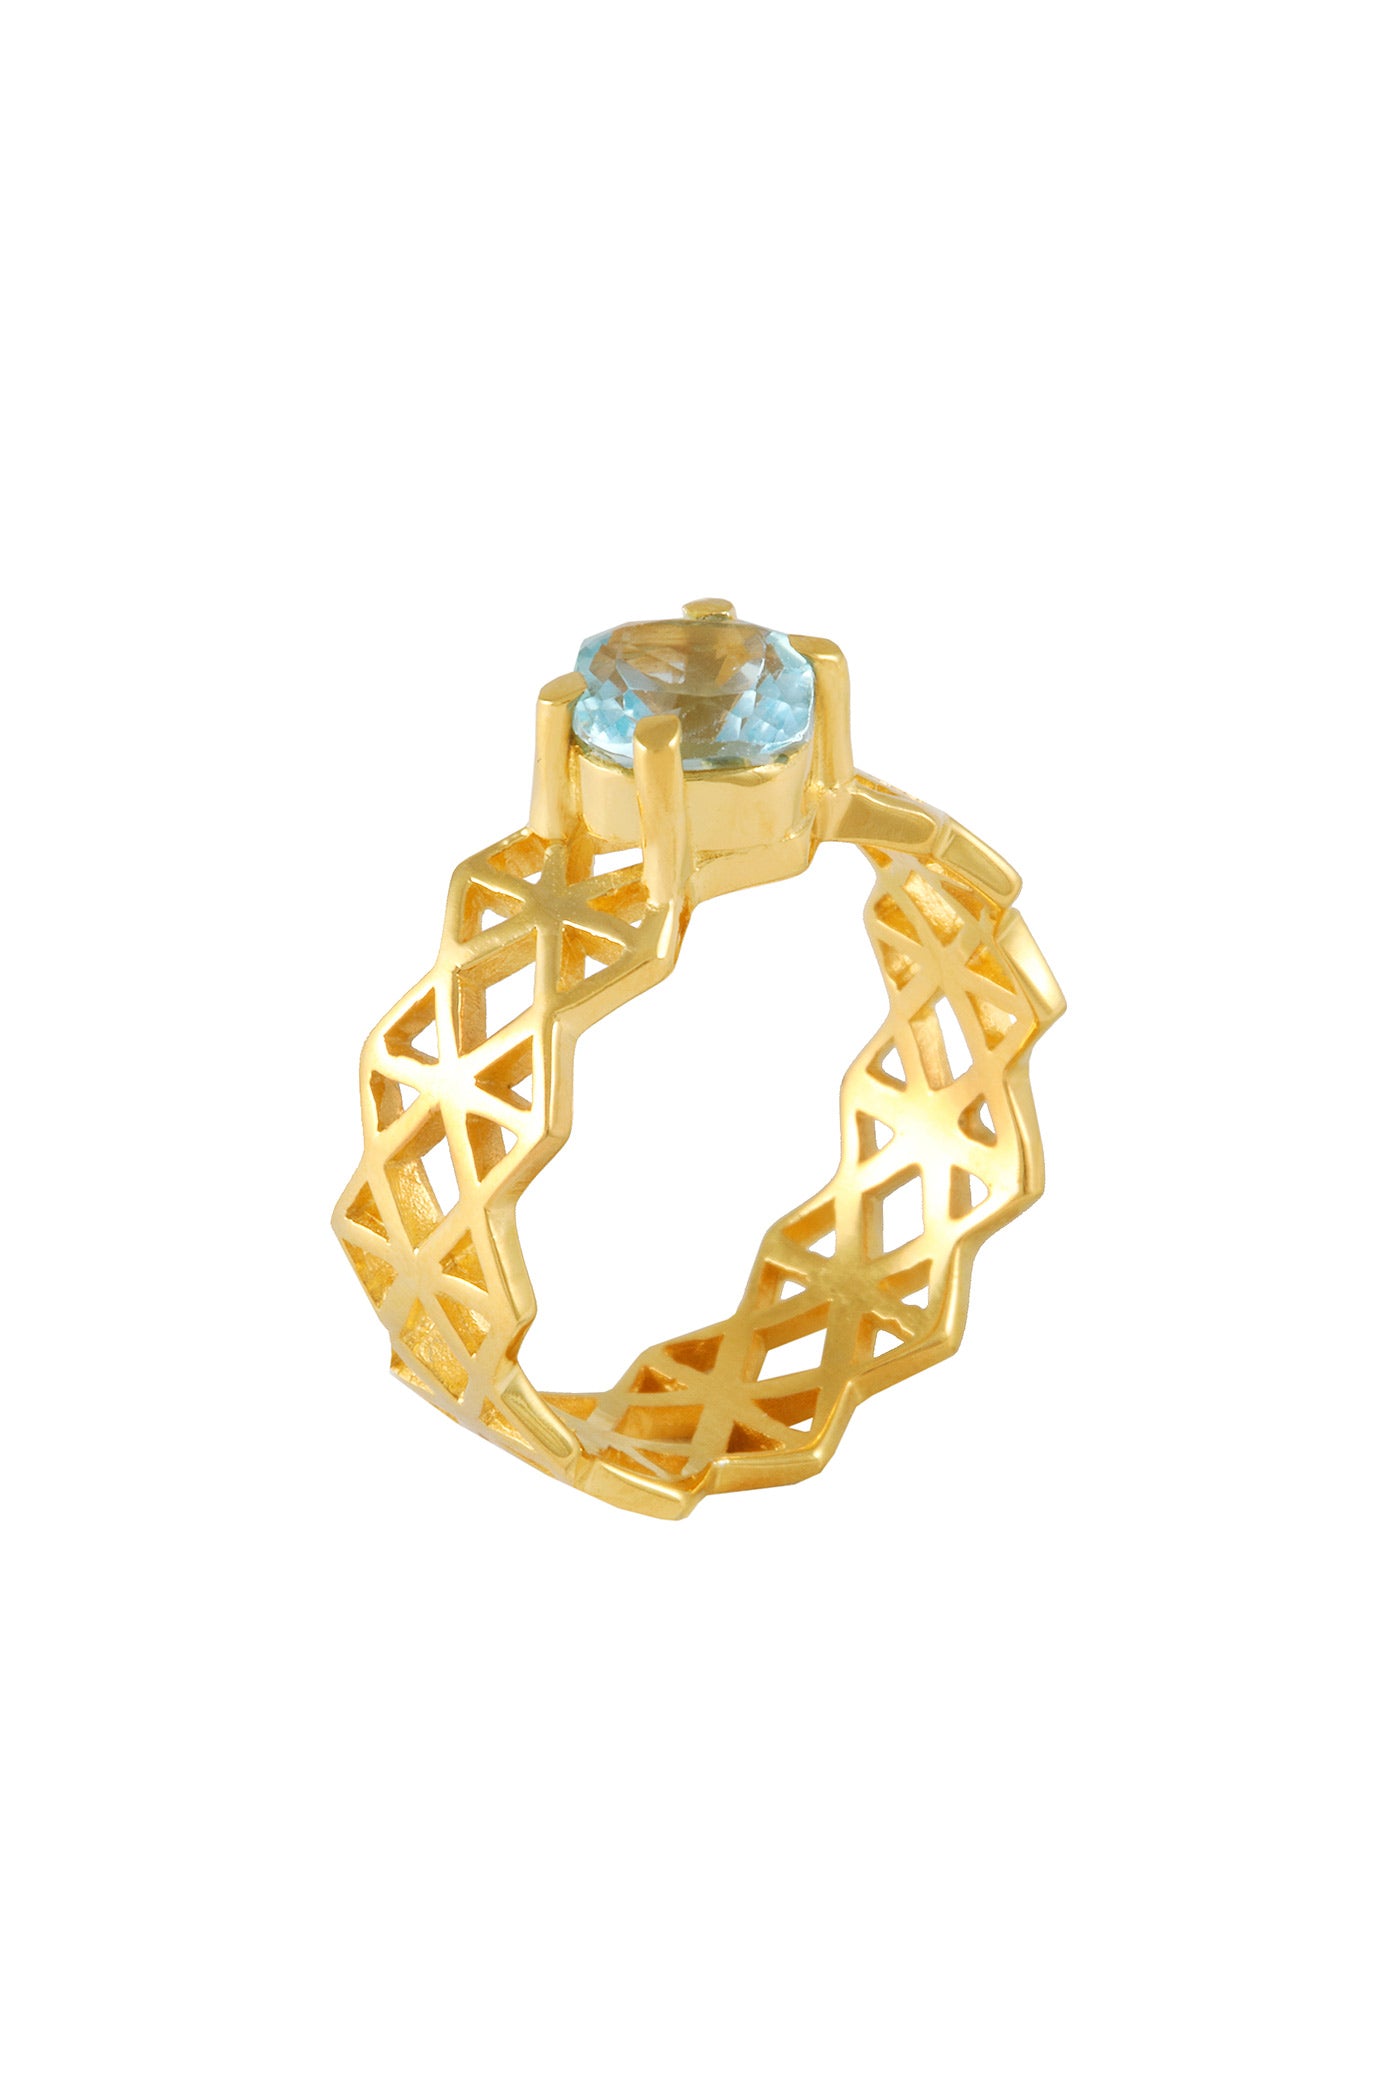 Large life force ring with topaz stone, gold plated